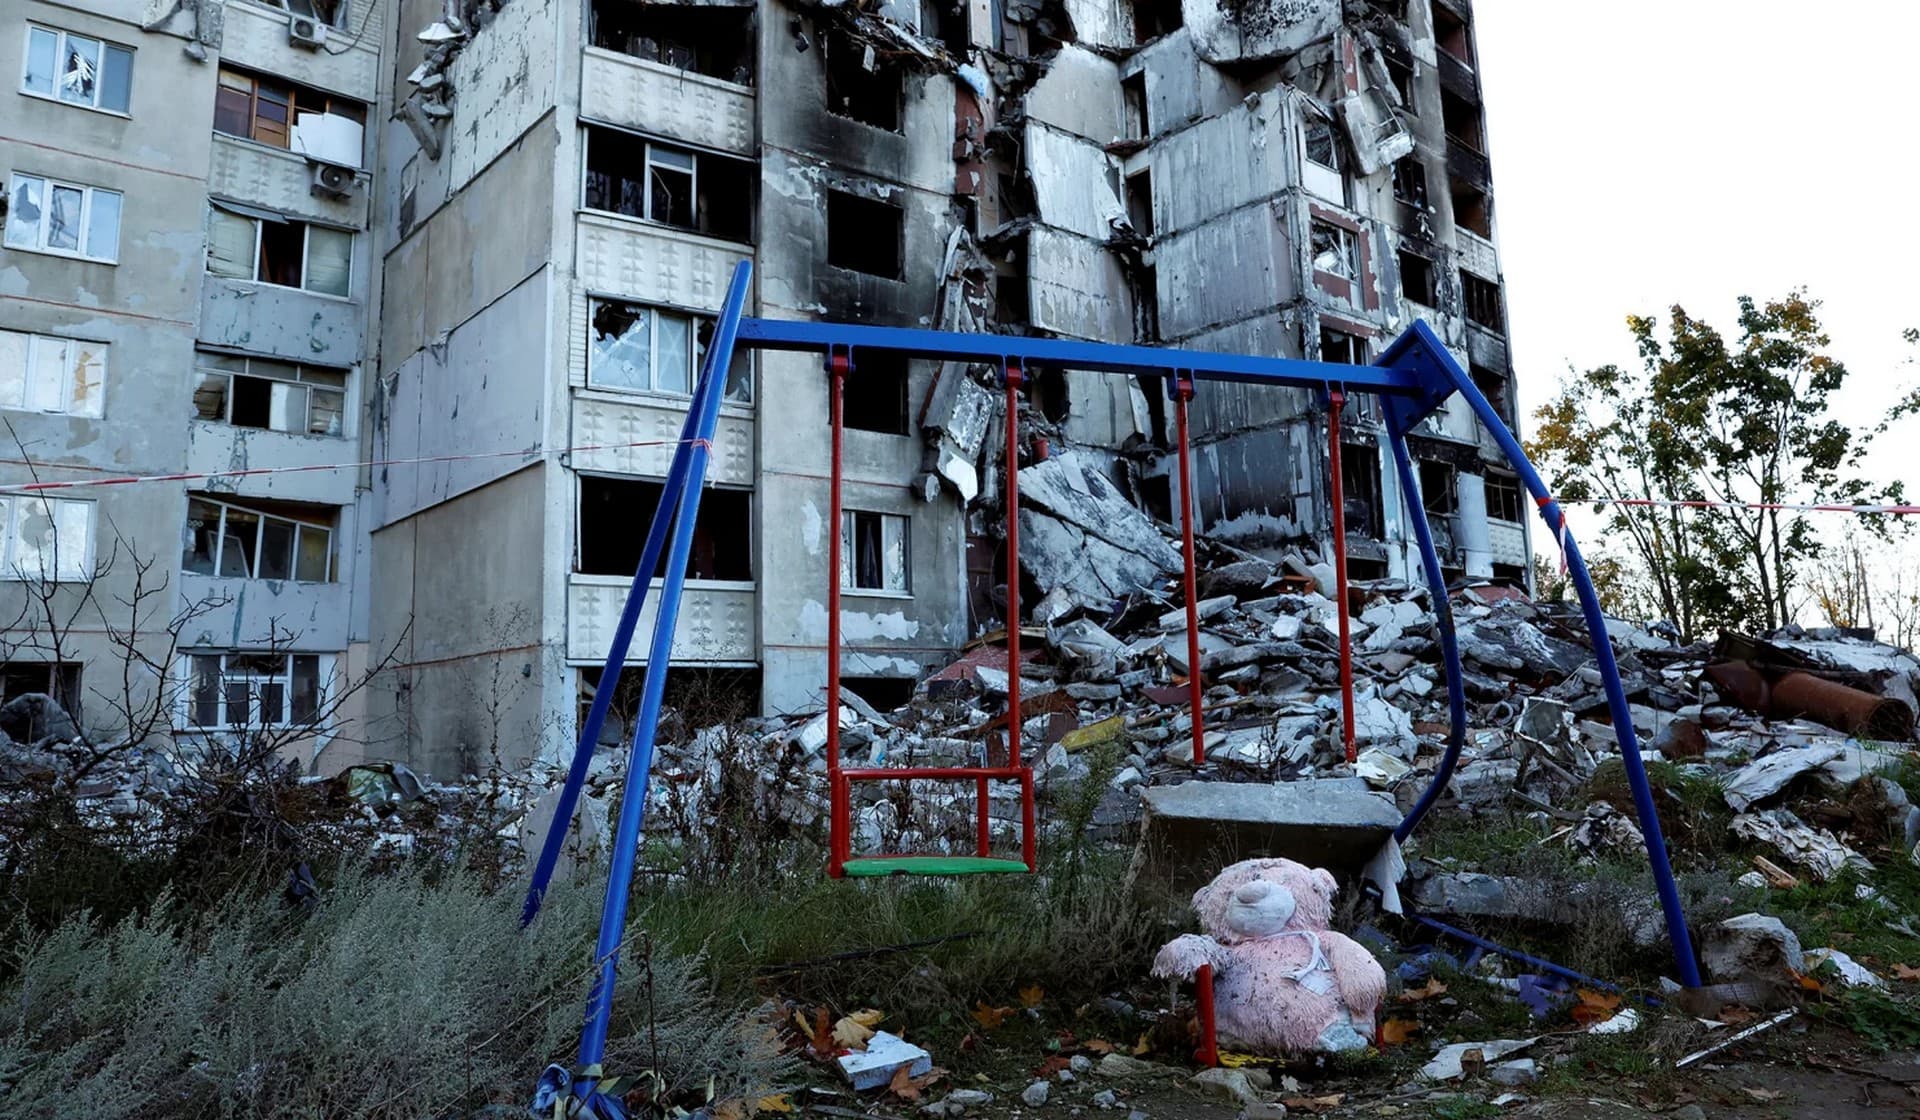 A pink teddy bear lies on the ground in front of residential apartments destroyed by Russian military strikes in Kharkiv